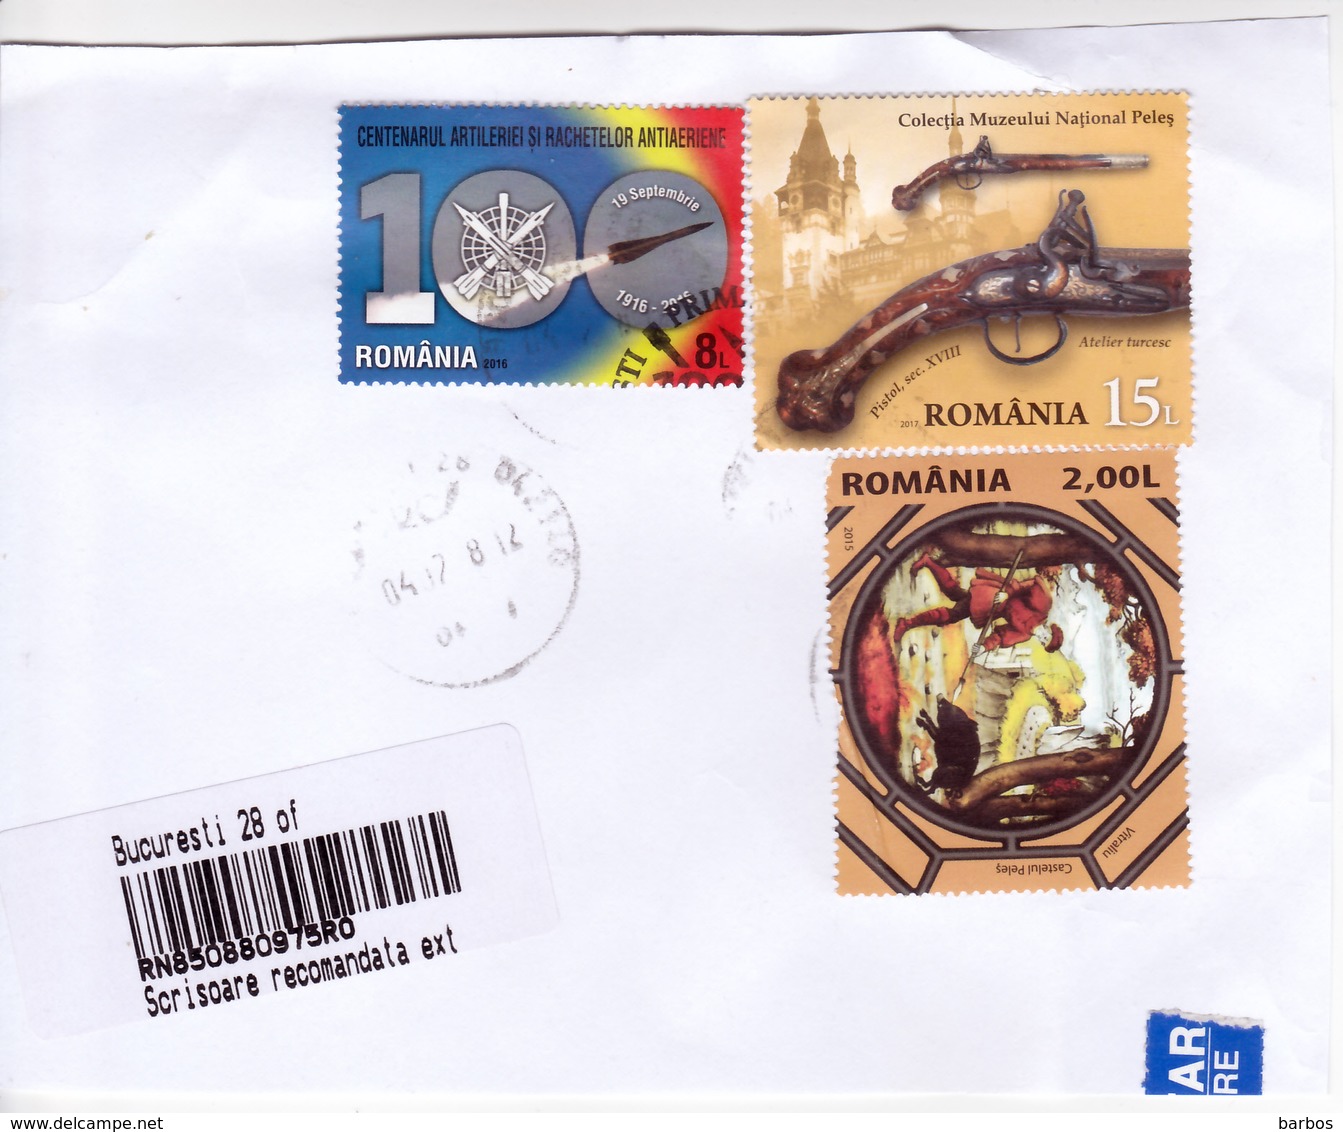 Romania , Roumanie  , Military , Rockets , Stained Glass Window , Fragment Of Used Cover - Used Stamps